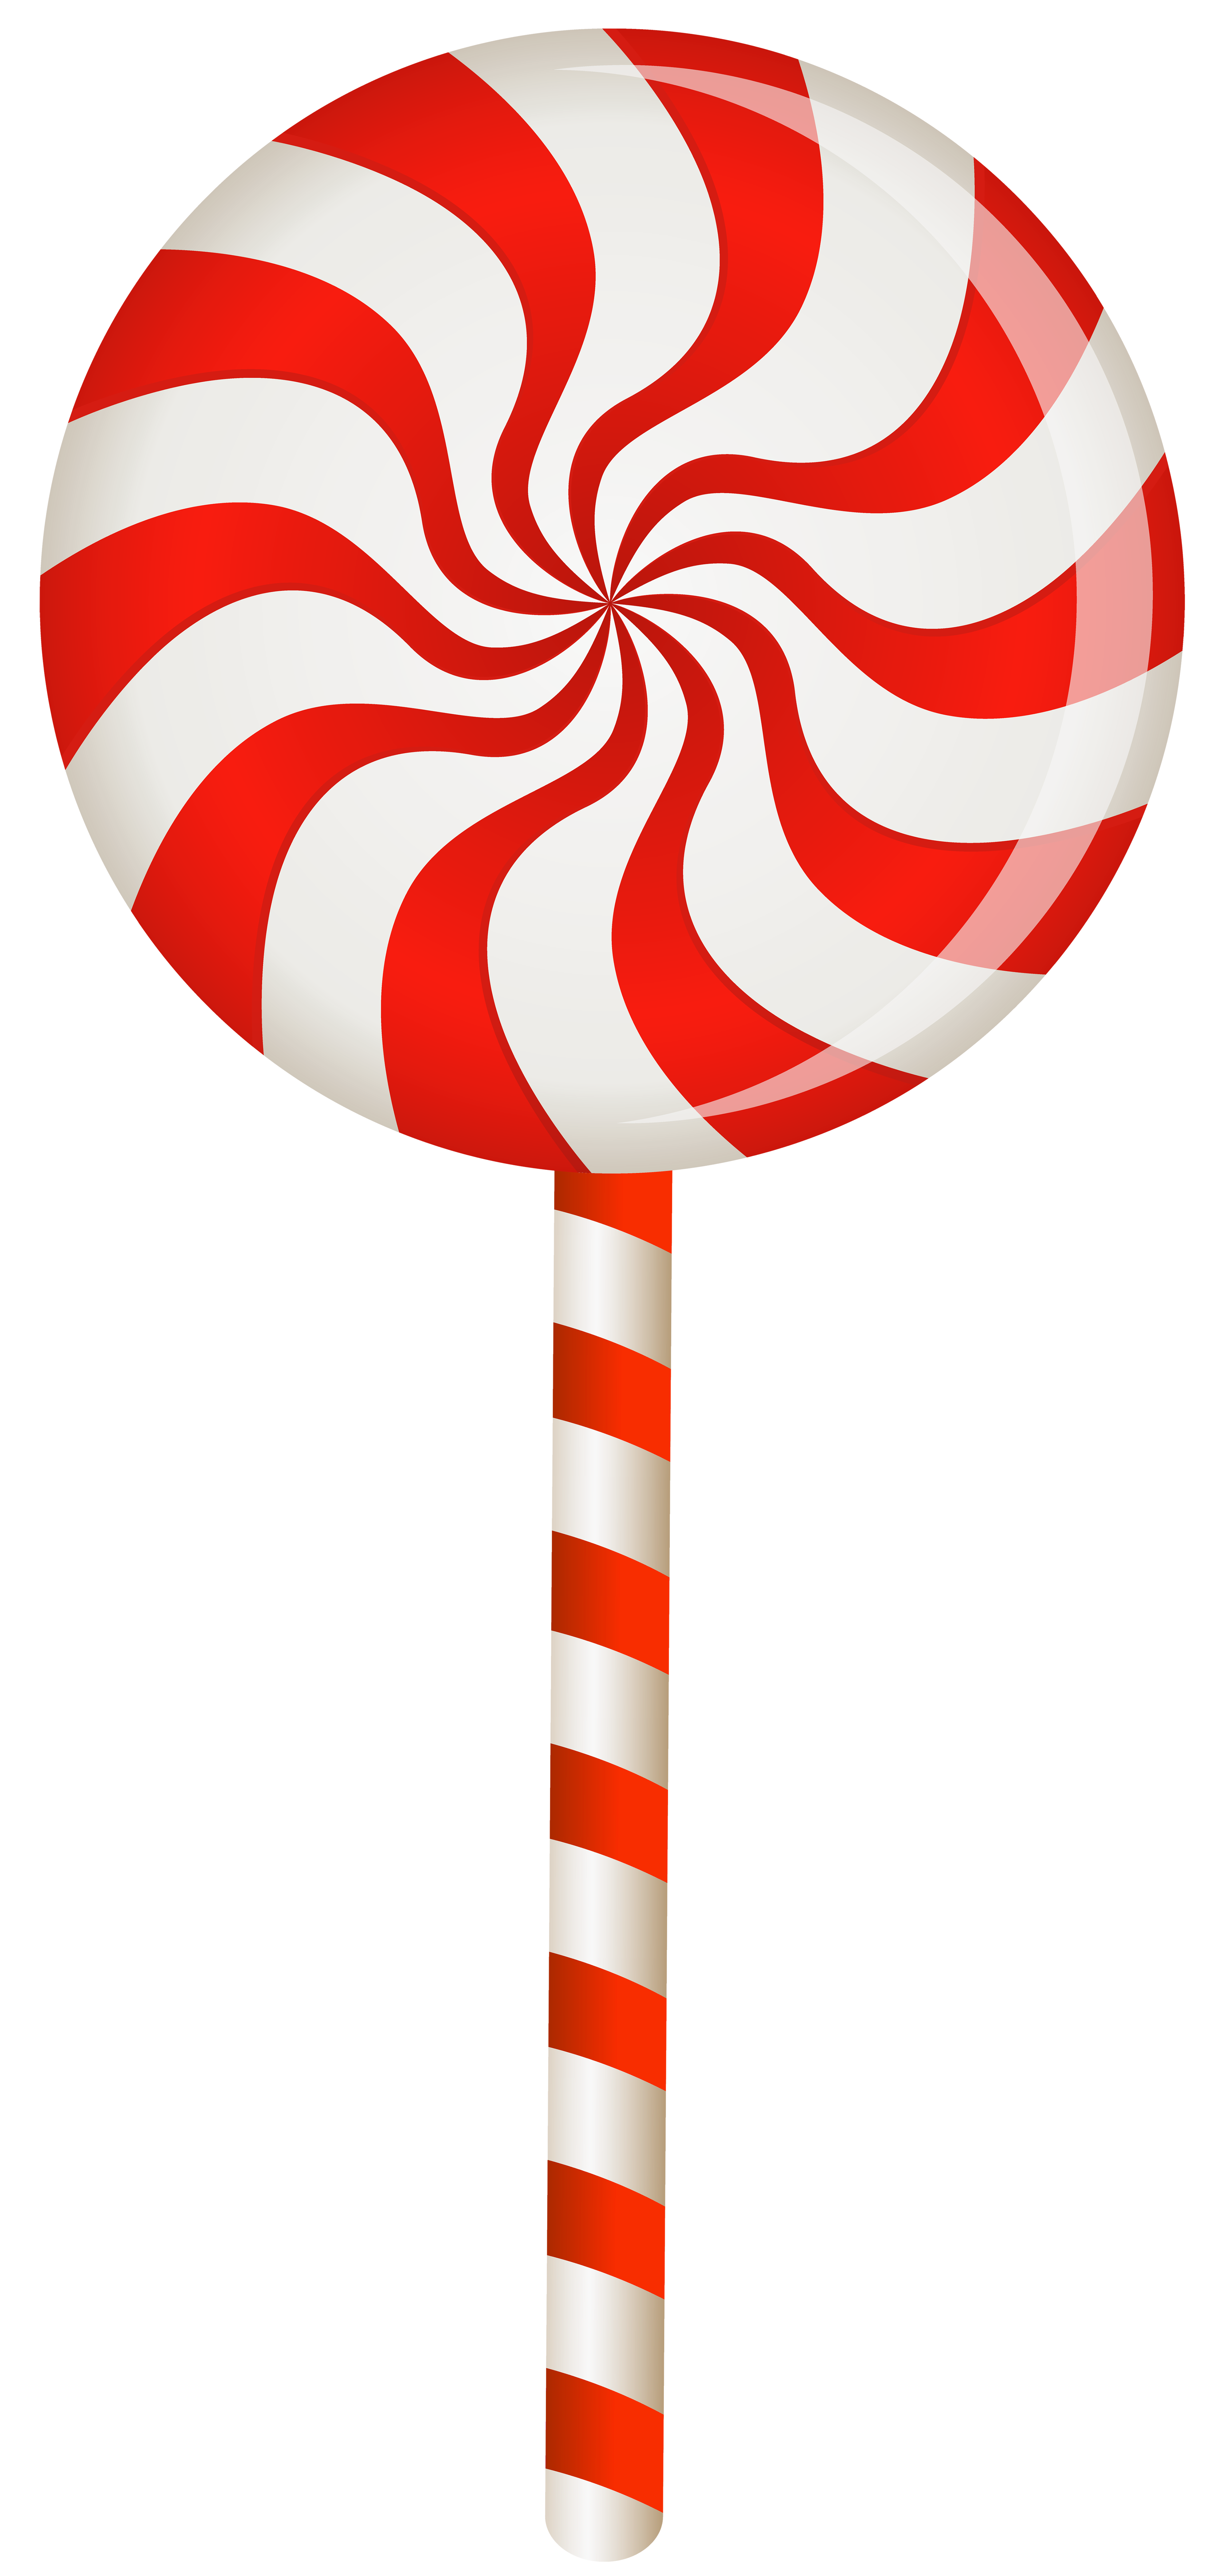 Red Swirl Lollipop PNG Clip Art Image | Gallery Yopriceville - High